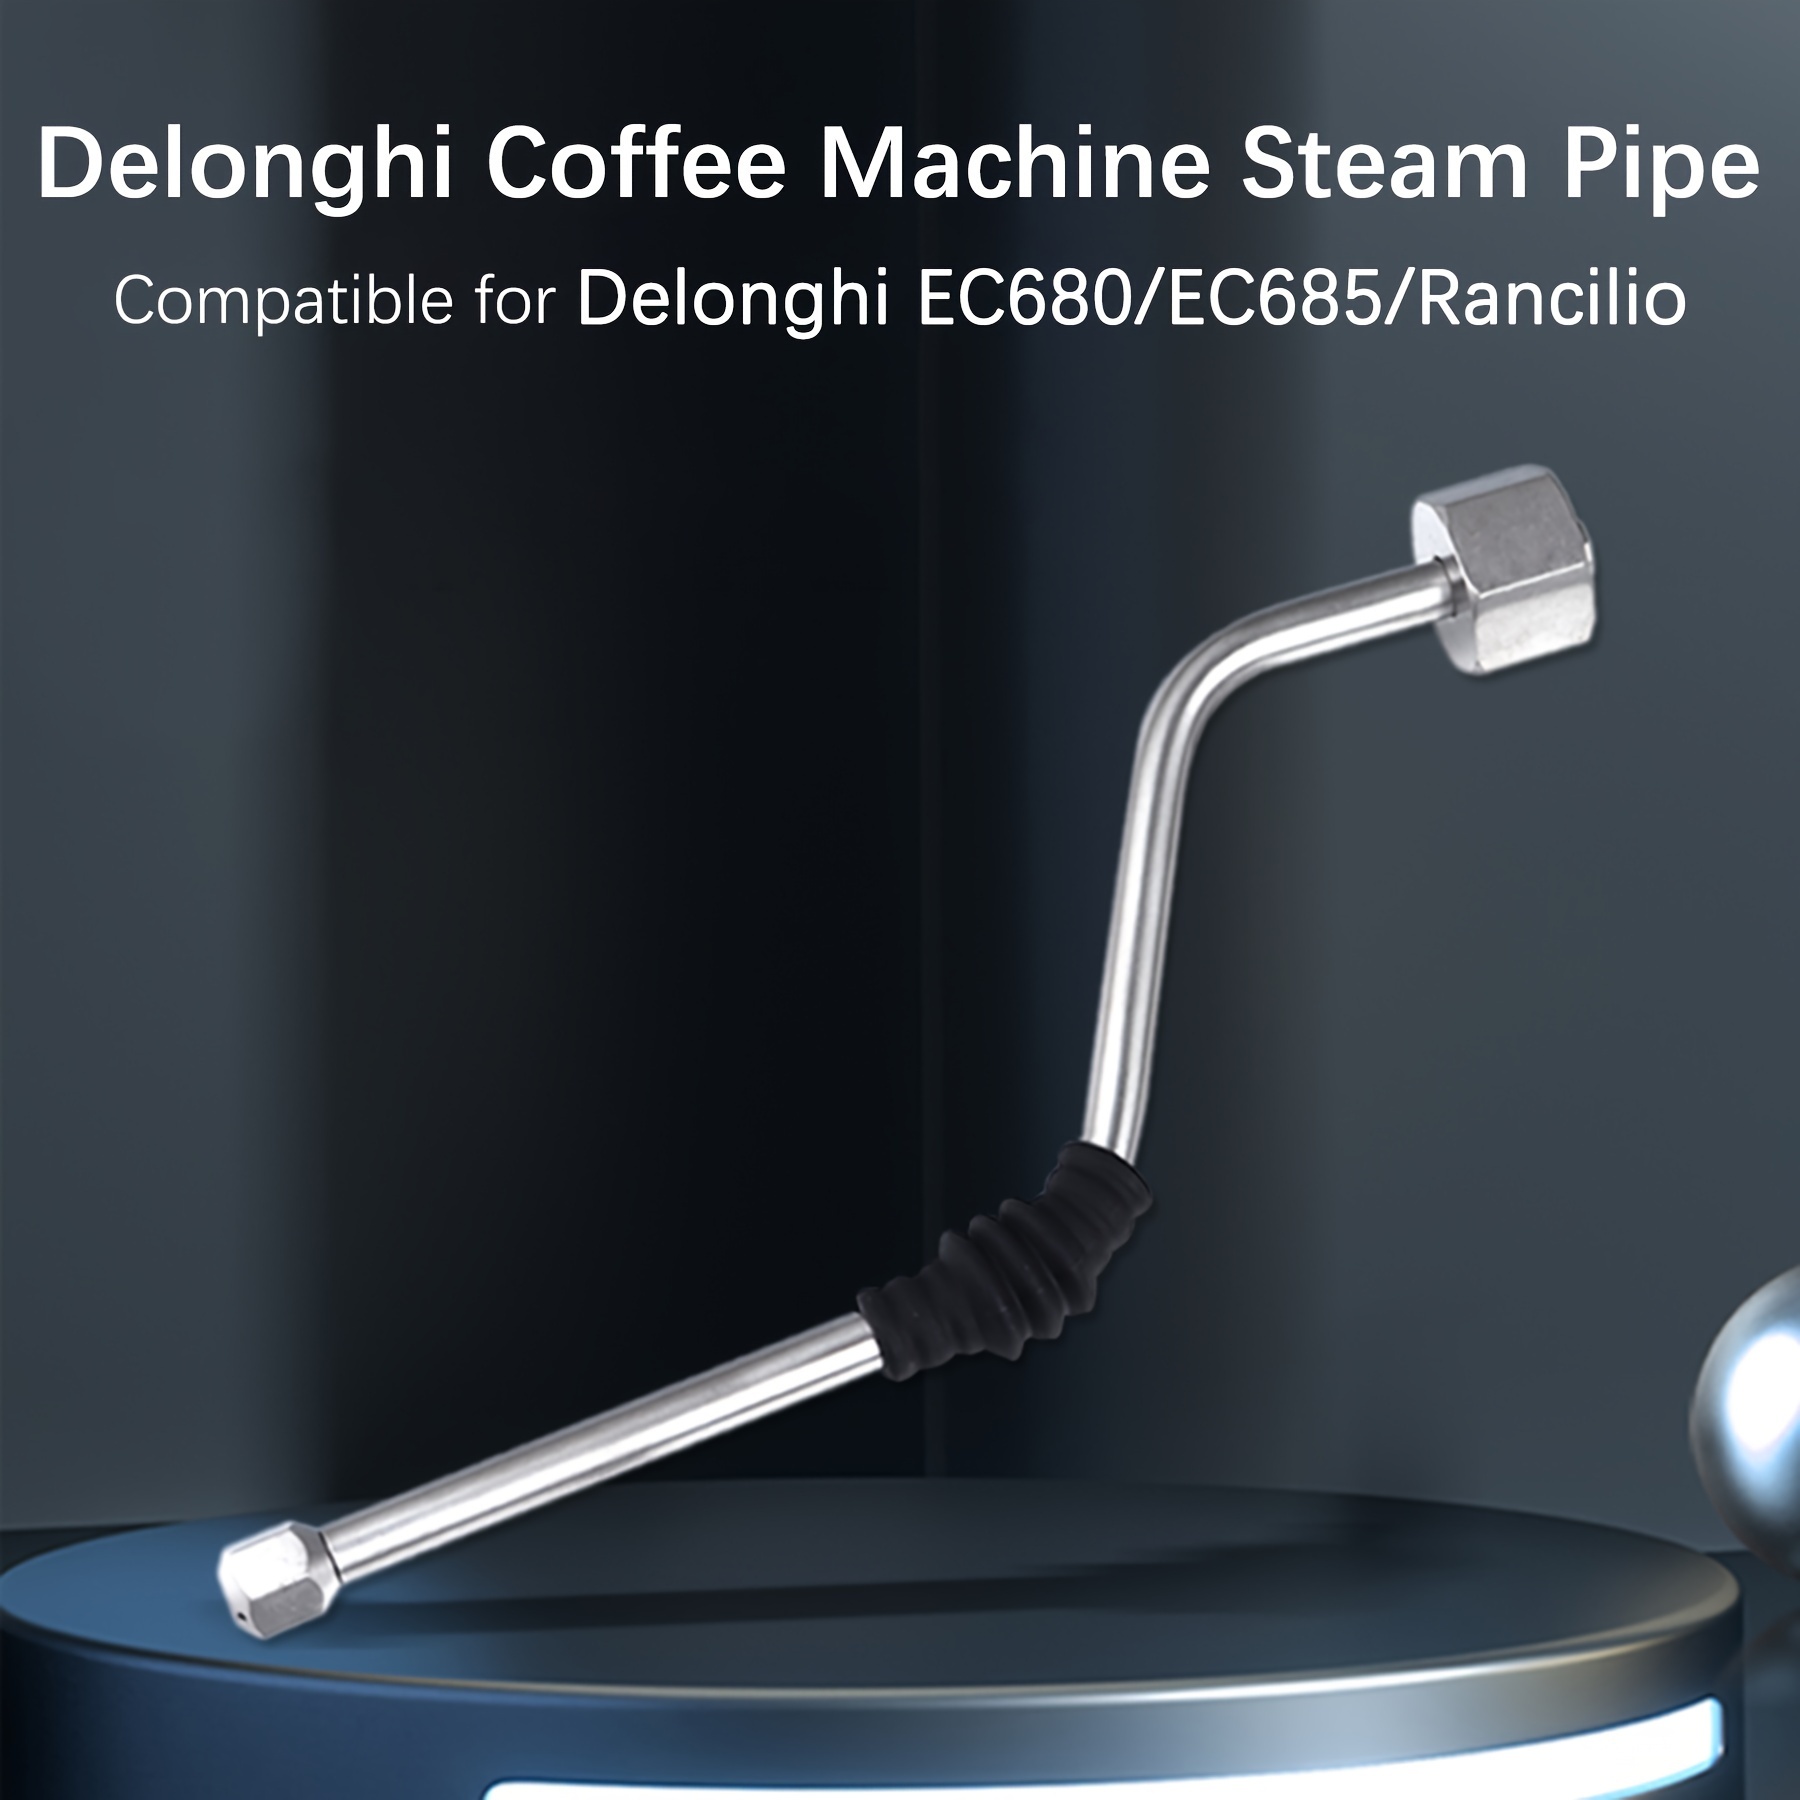 Gerich Stainless Steel Steam Wand Steam Arms for DeLonghi Coffee